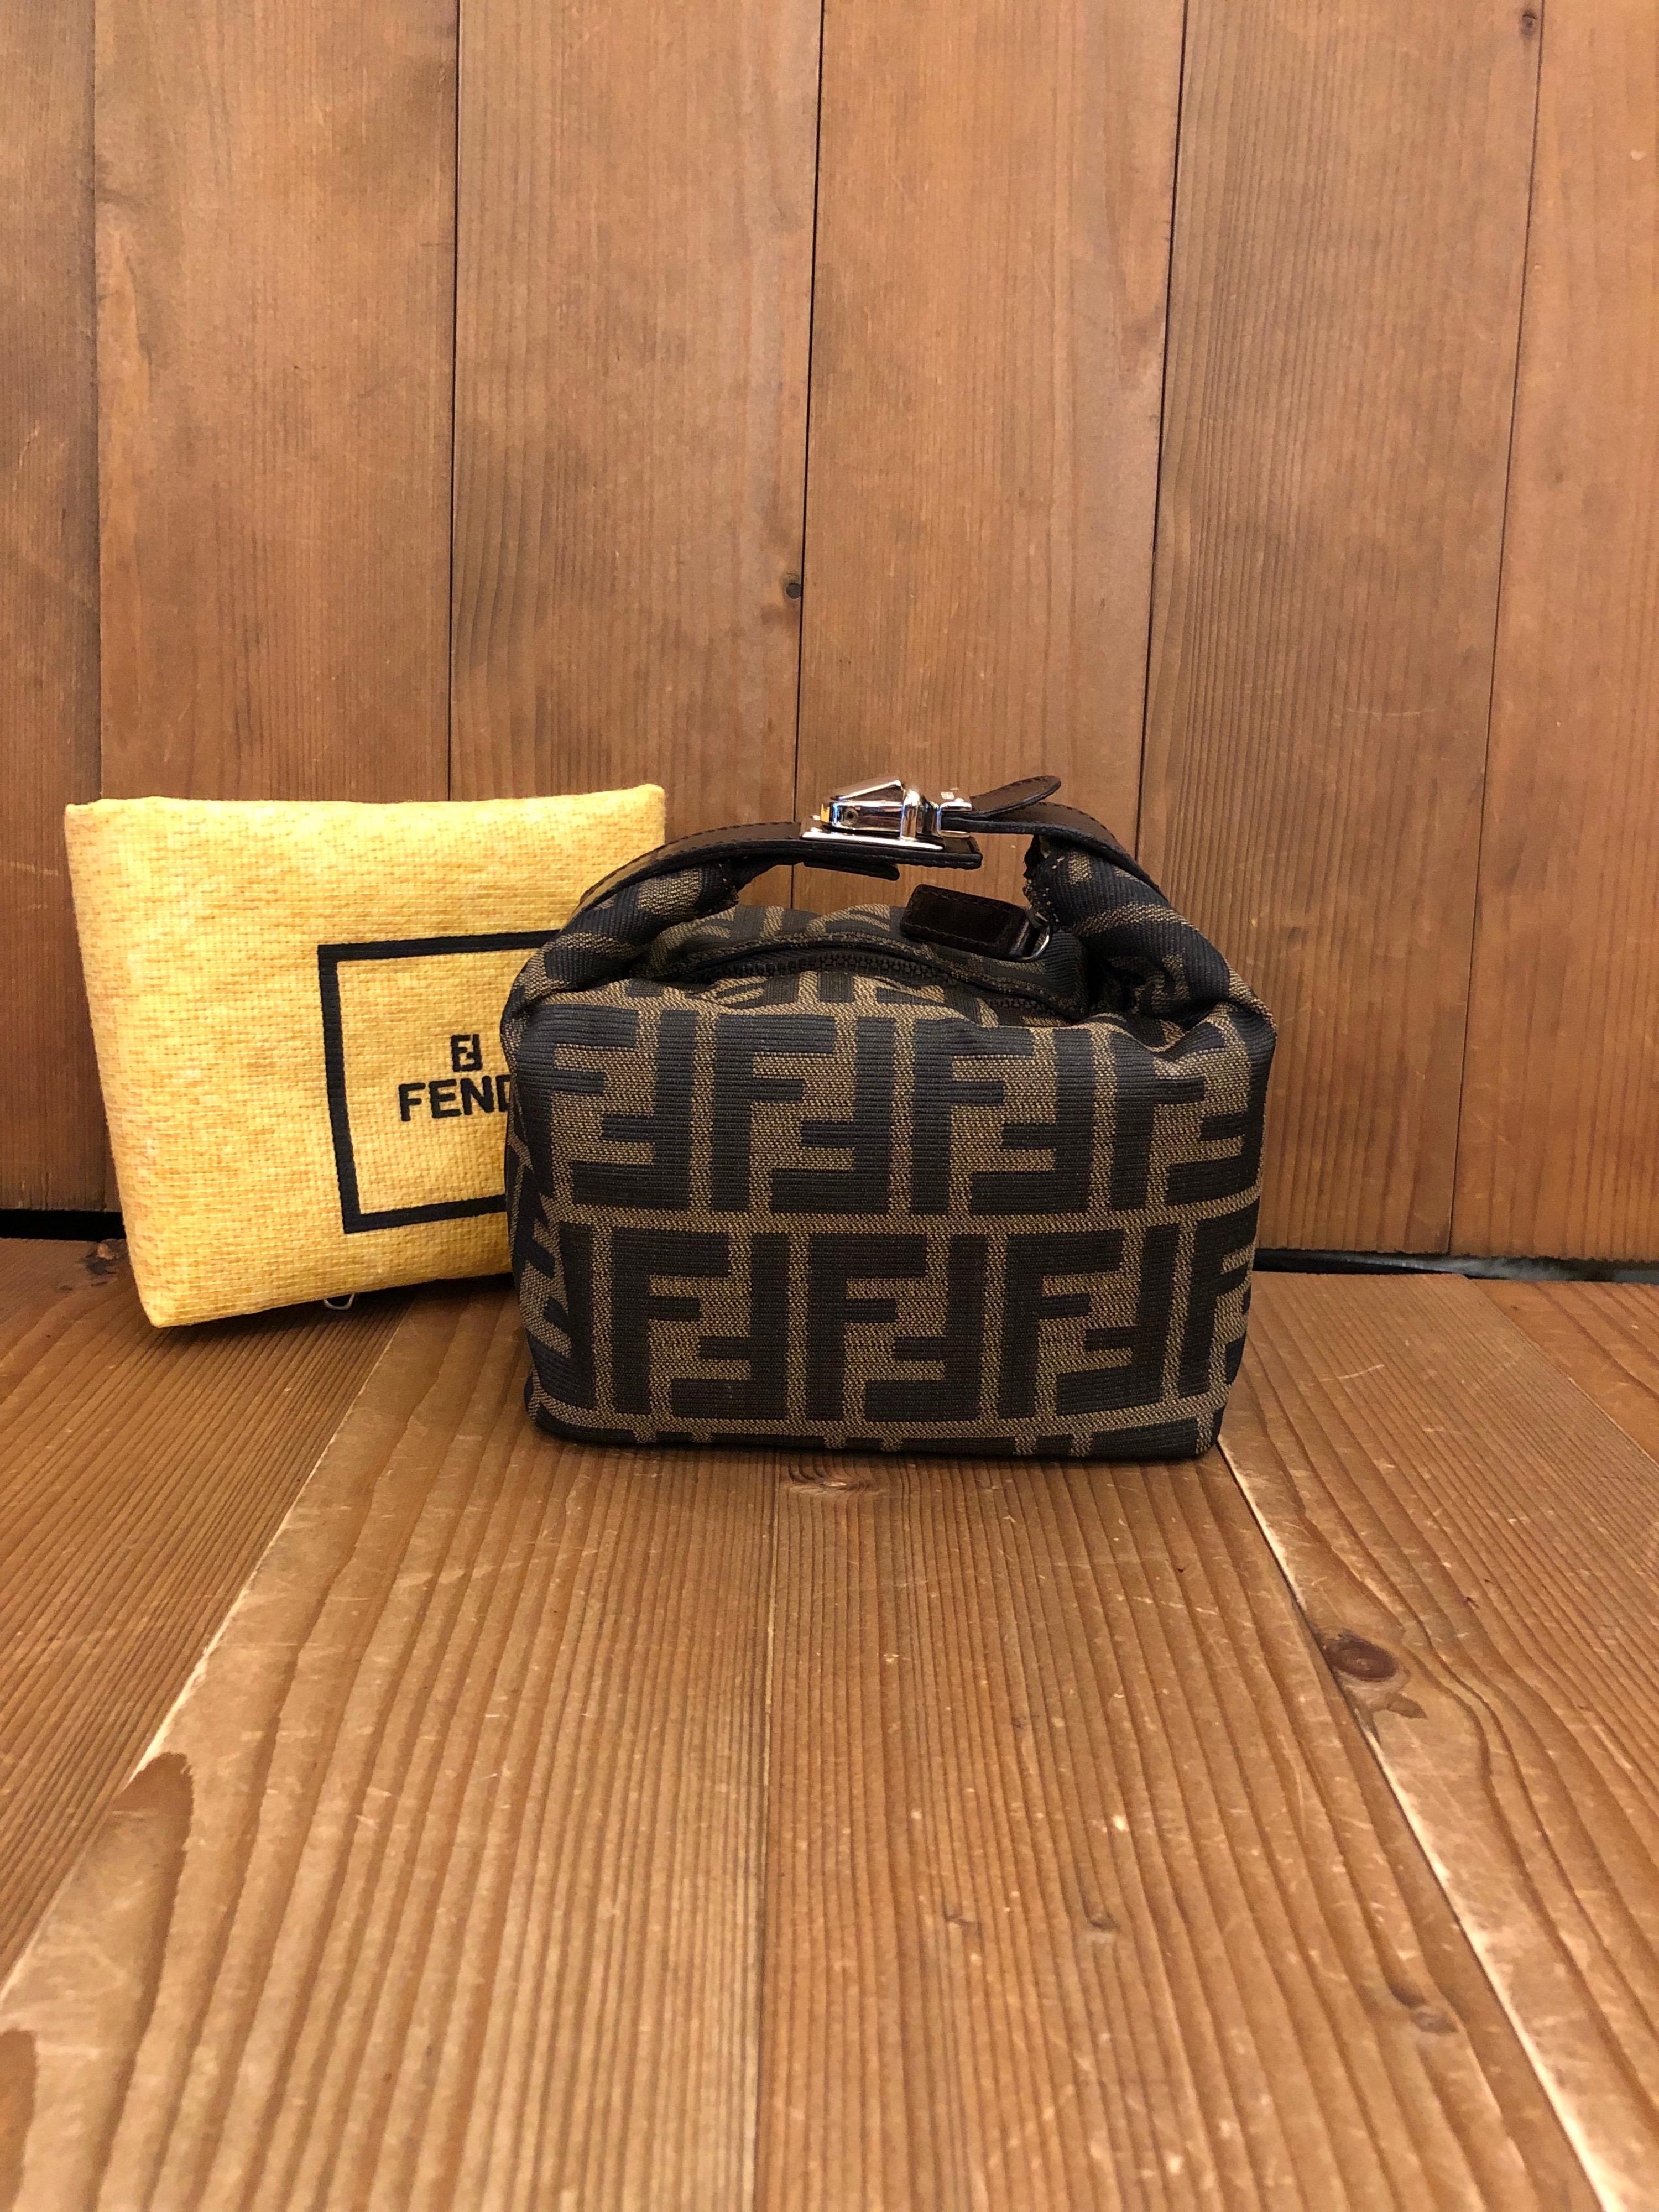 Vintage Fendi mini vanity pouch in Fendi's iconic Zucca jacquard featuring silver toned buckled handle. Made in Italy. Measures 6 x 5 x 3.75 inches (fits plus-sized iPhone). Comes with dust bag.

Condition: Minor signs of wear with interior fully